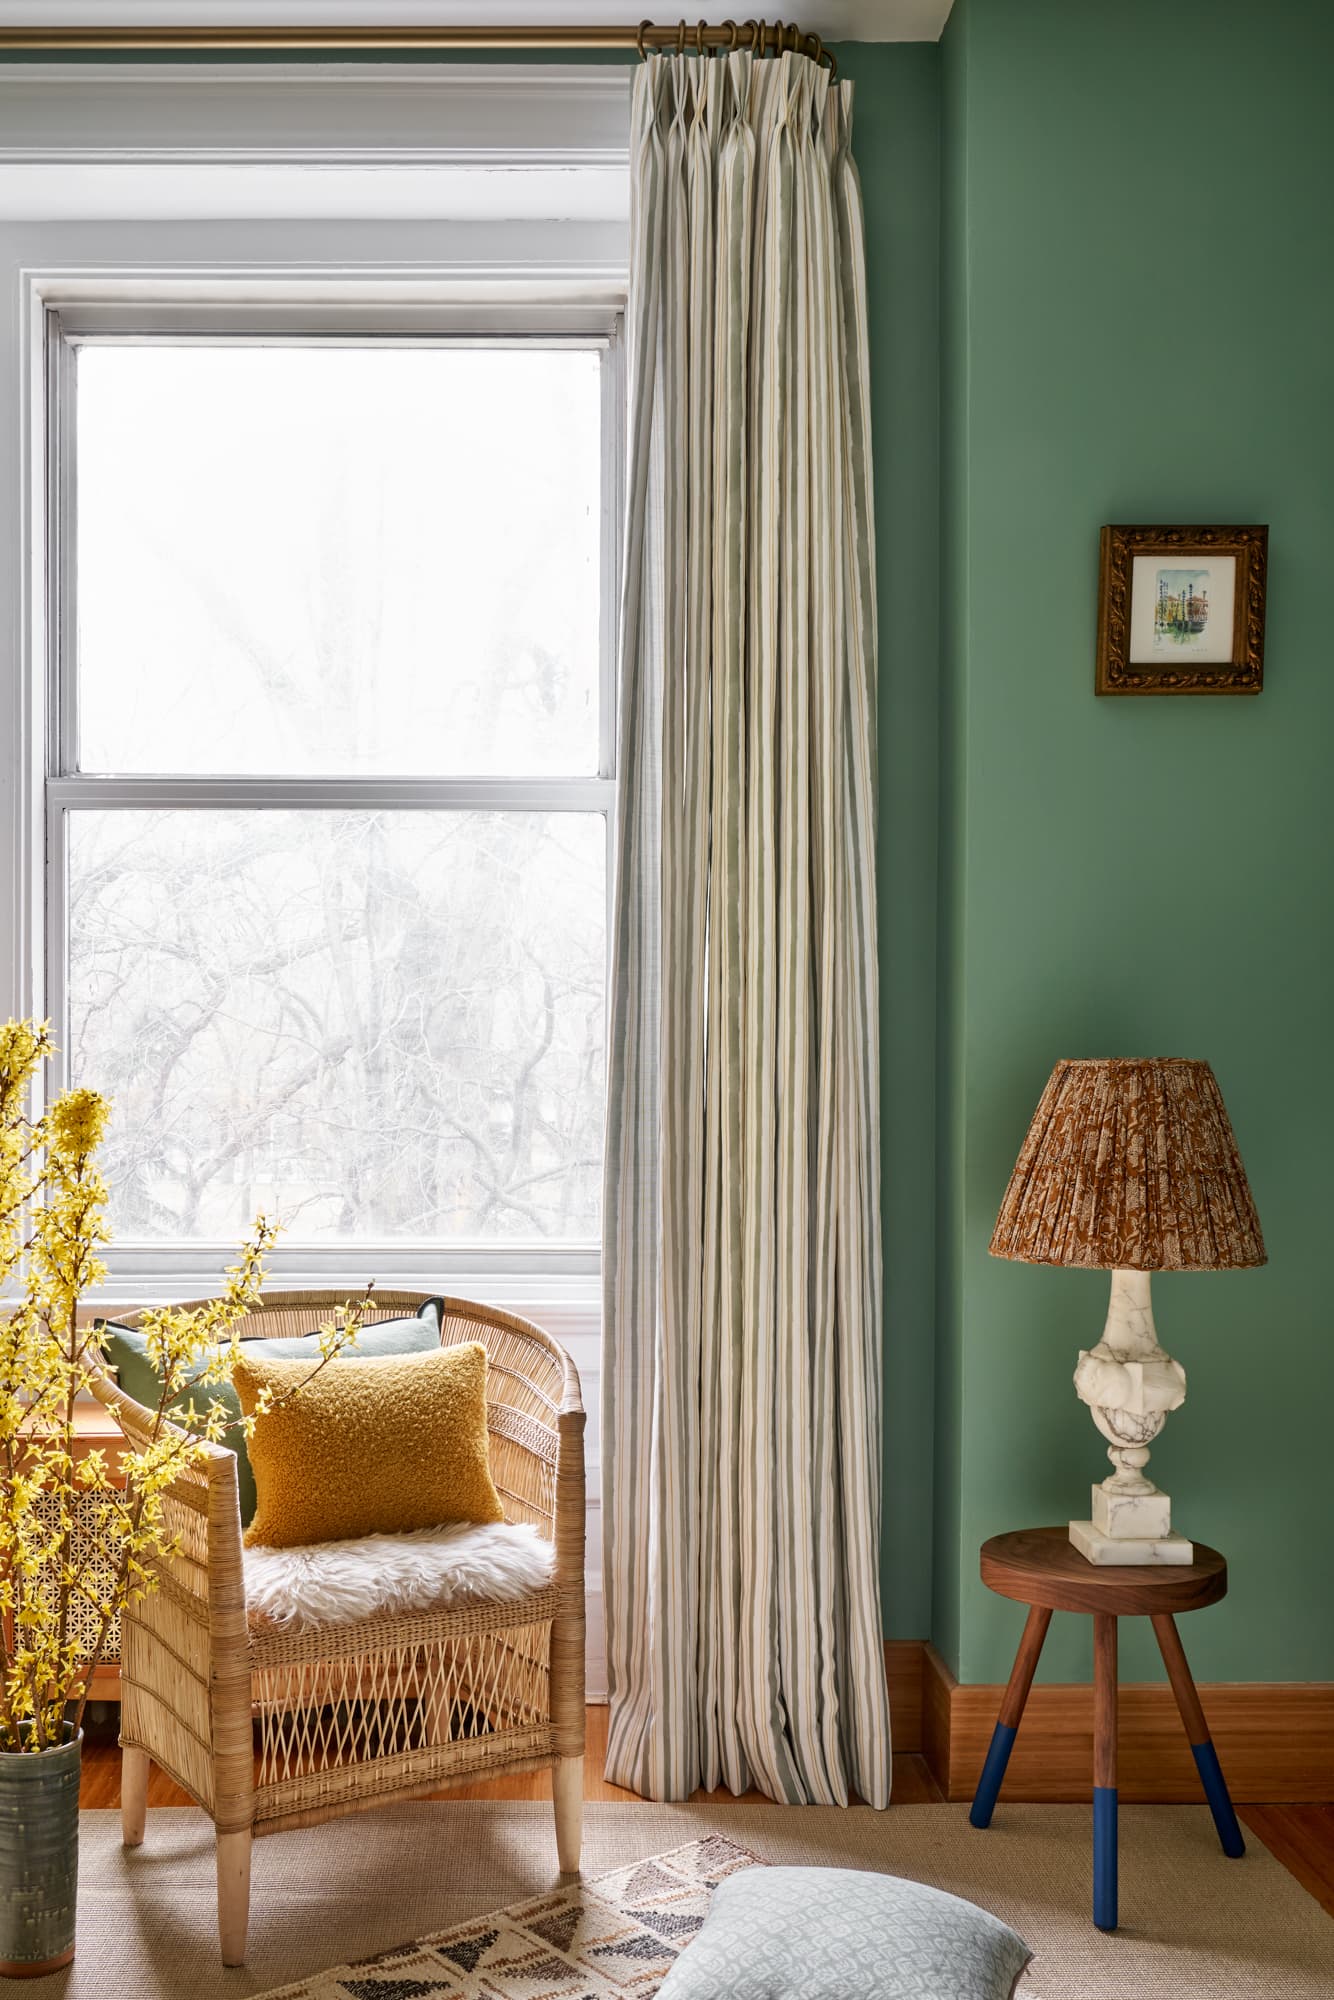 WHAT COLORS GO WITH FOREST GREEN IN DECORATING?